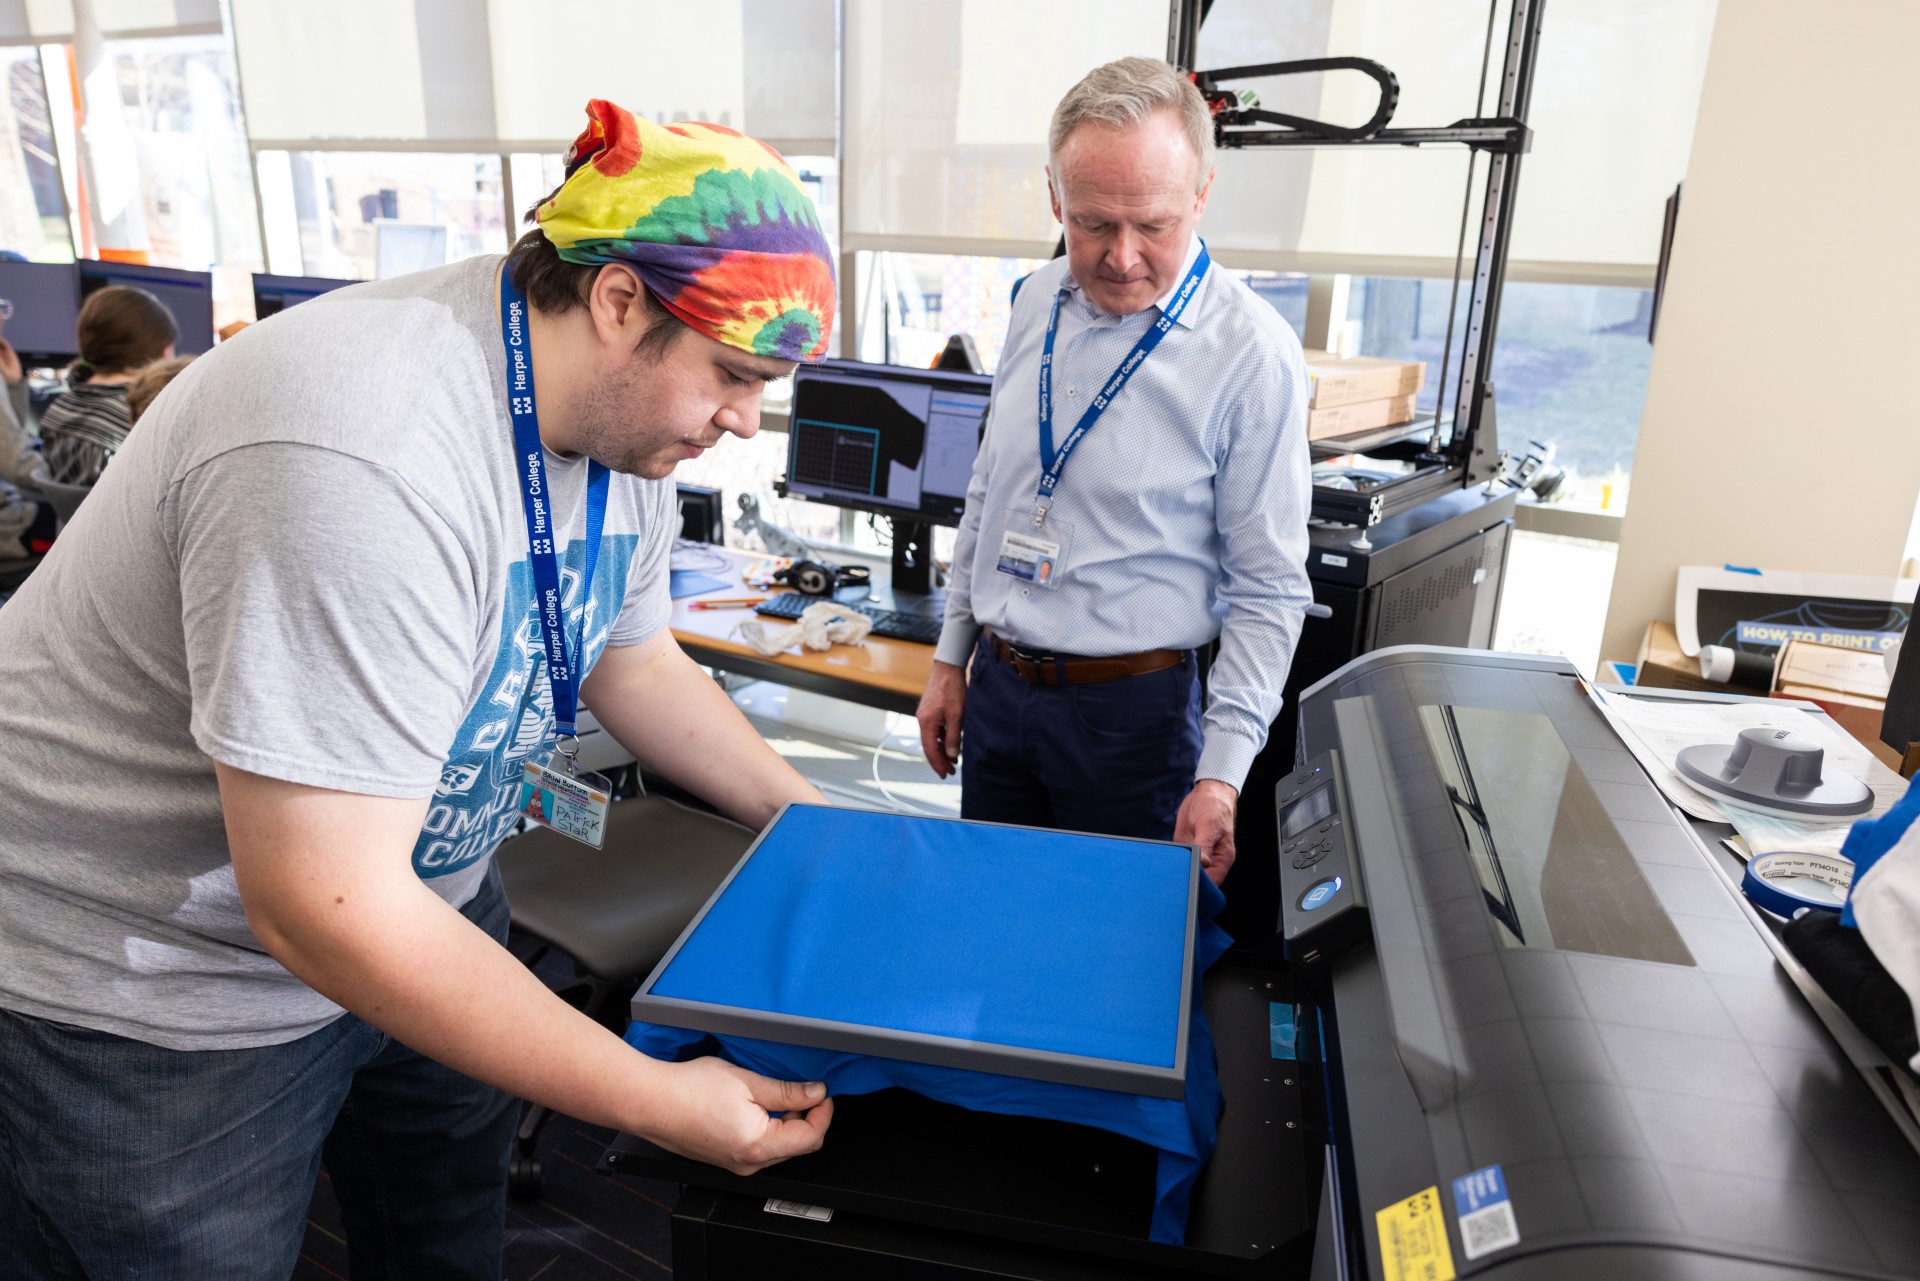 Professor showing student how to print graphic onto shirt